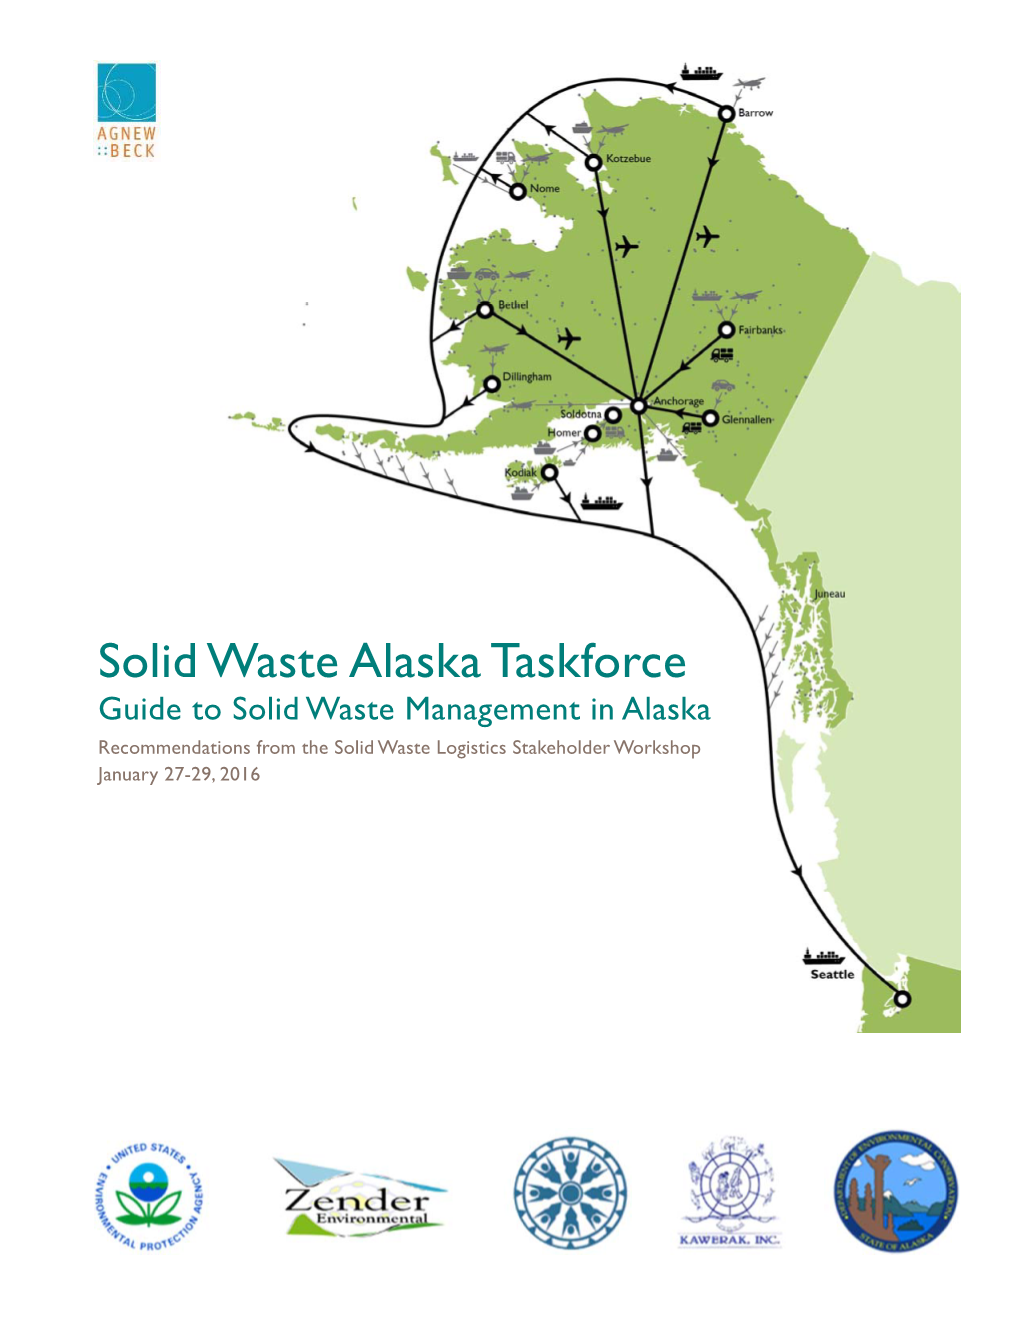 Solid Waste Alaska Taskforce Guide to Solid Waste Management in Alaska Recommendations from the Solid Waste Logistics Stakeholder Workshop January 27-29, 2016